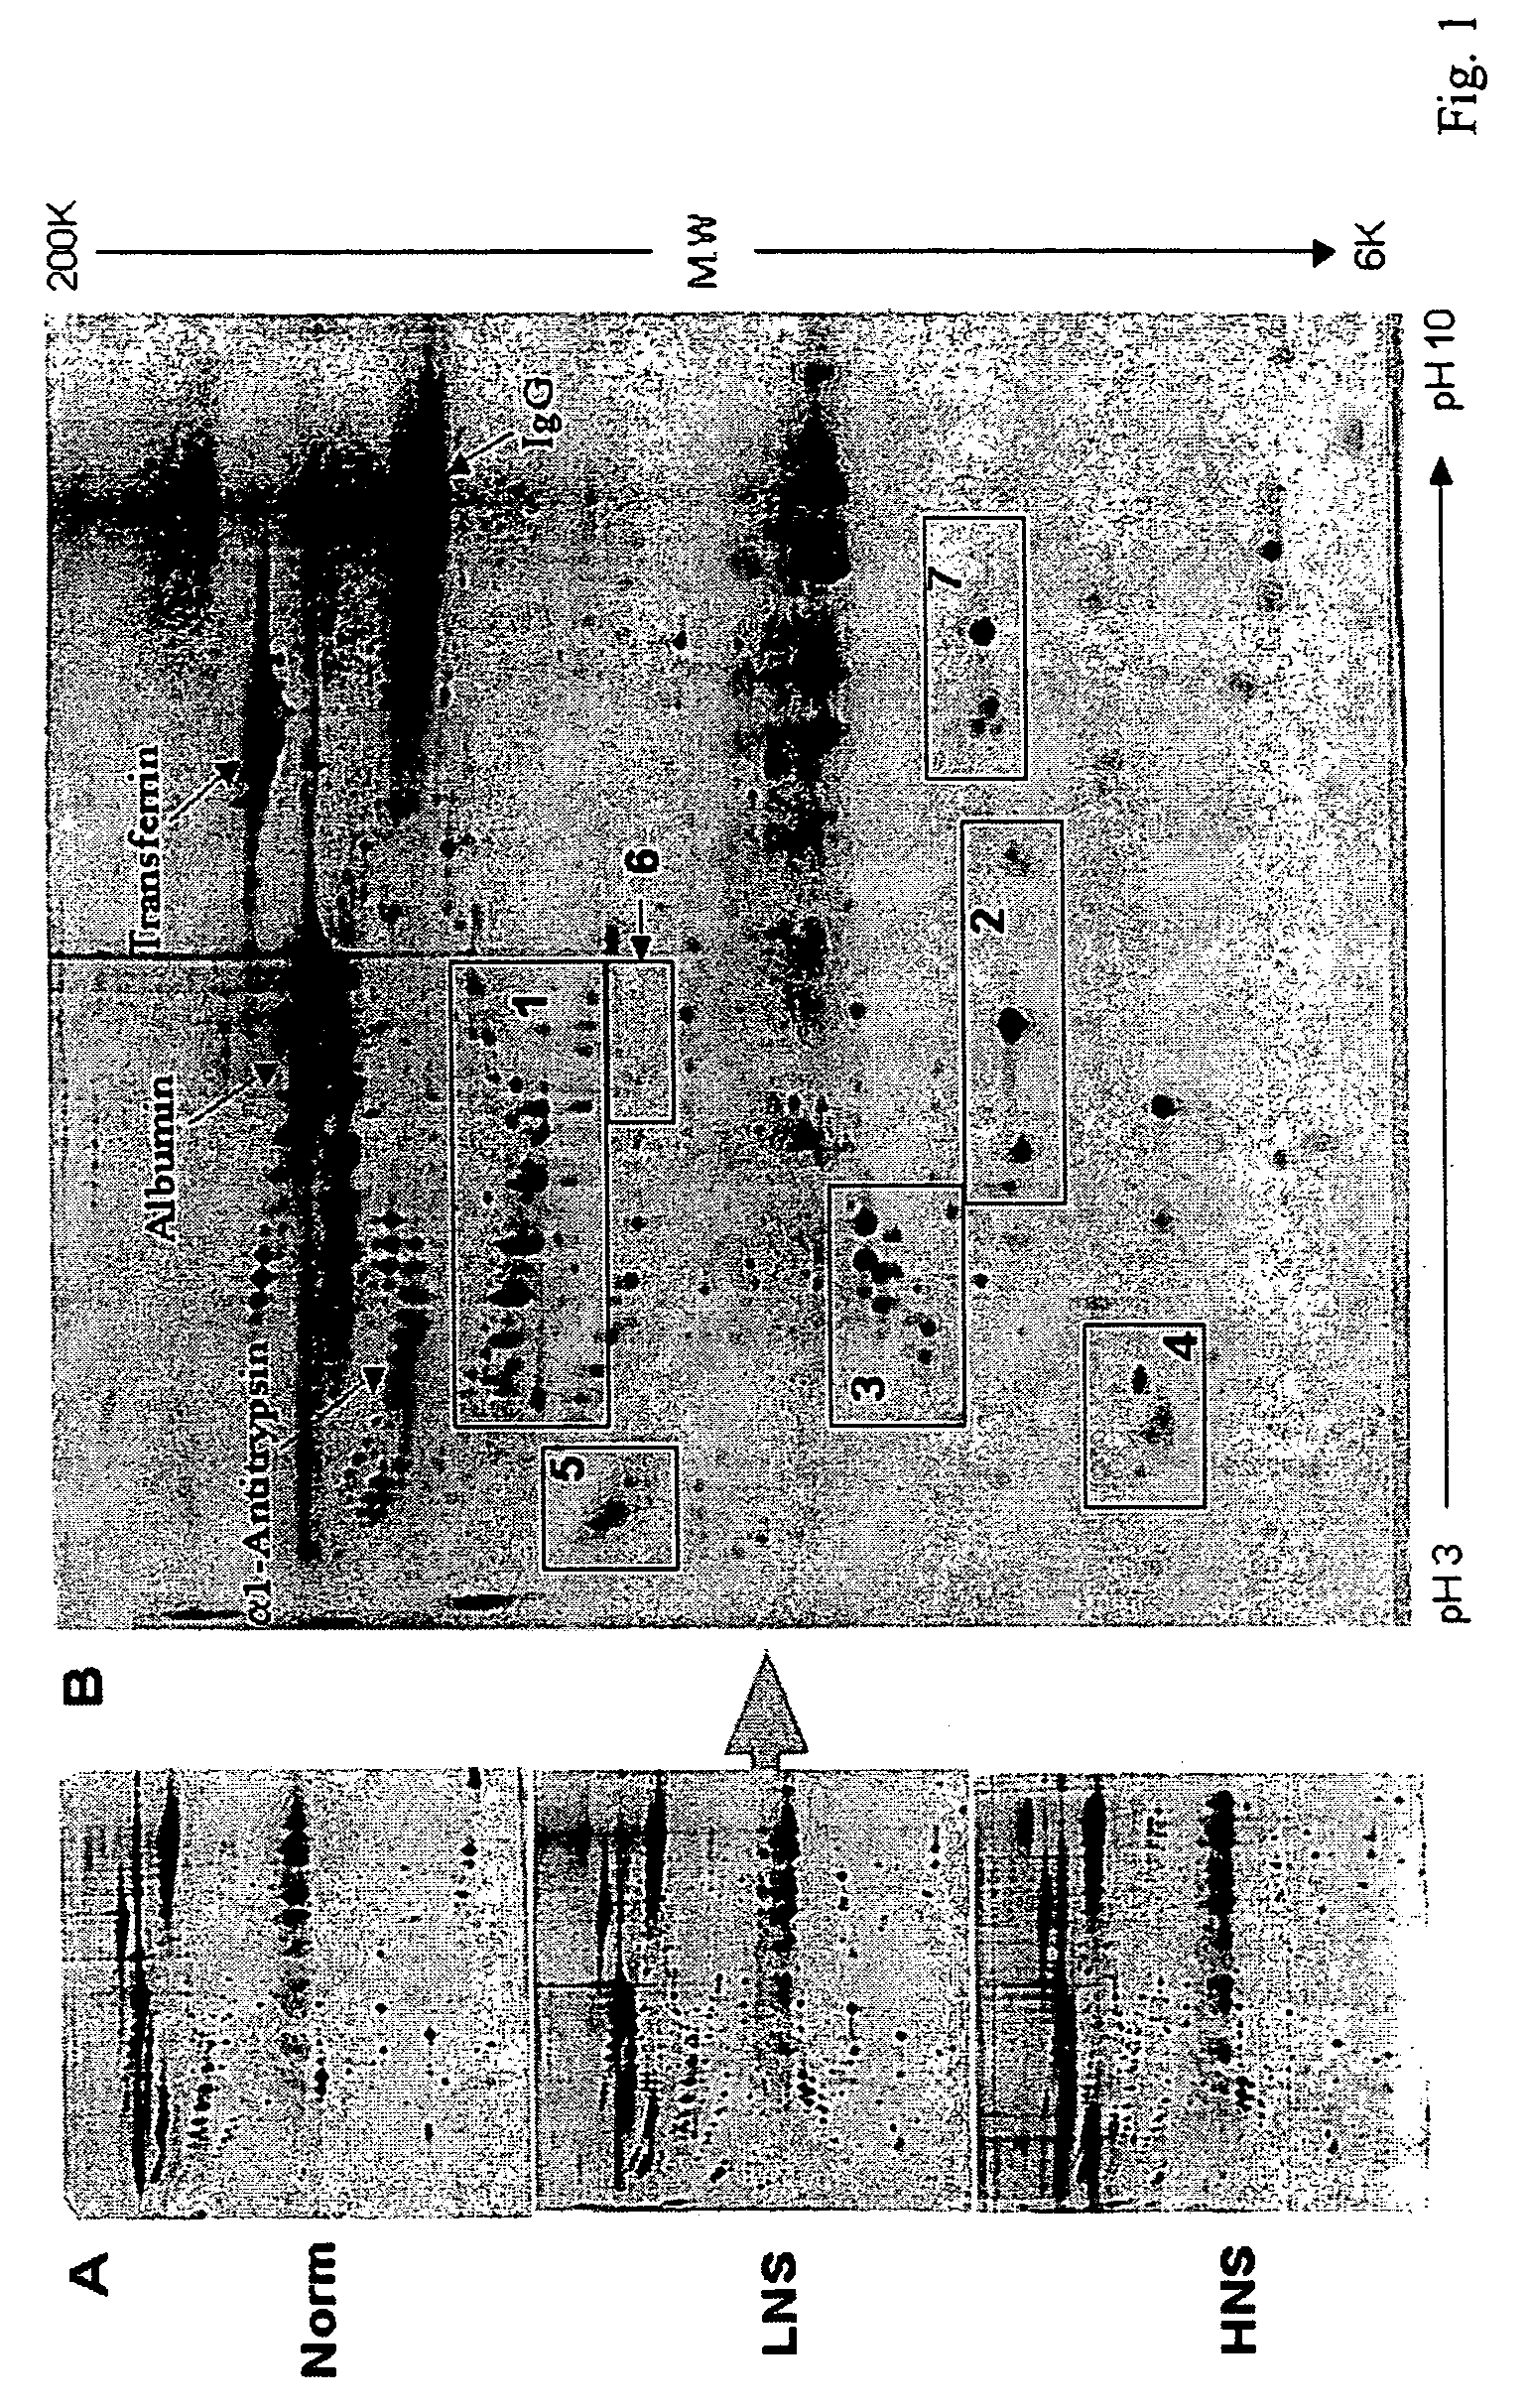 Serum biomarkers of Hepatitis B Virus infected liver and methods for detection thereof